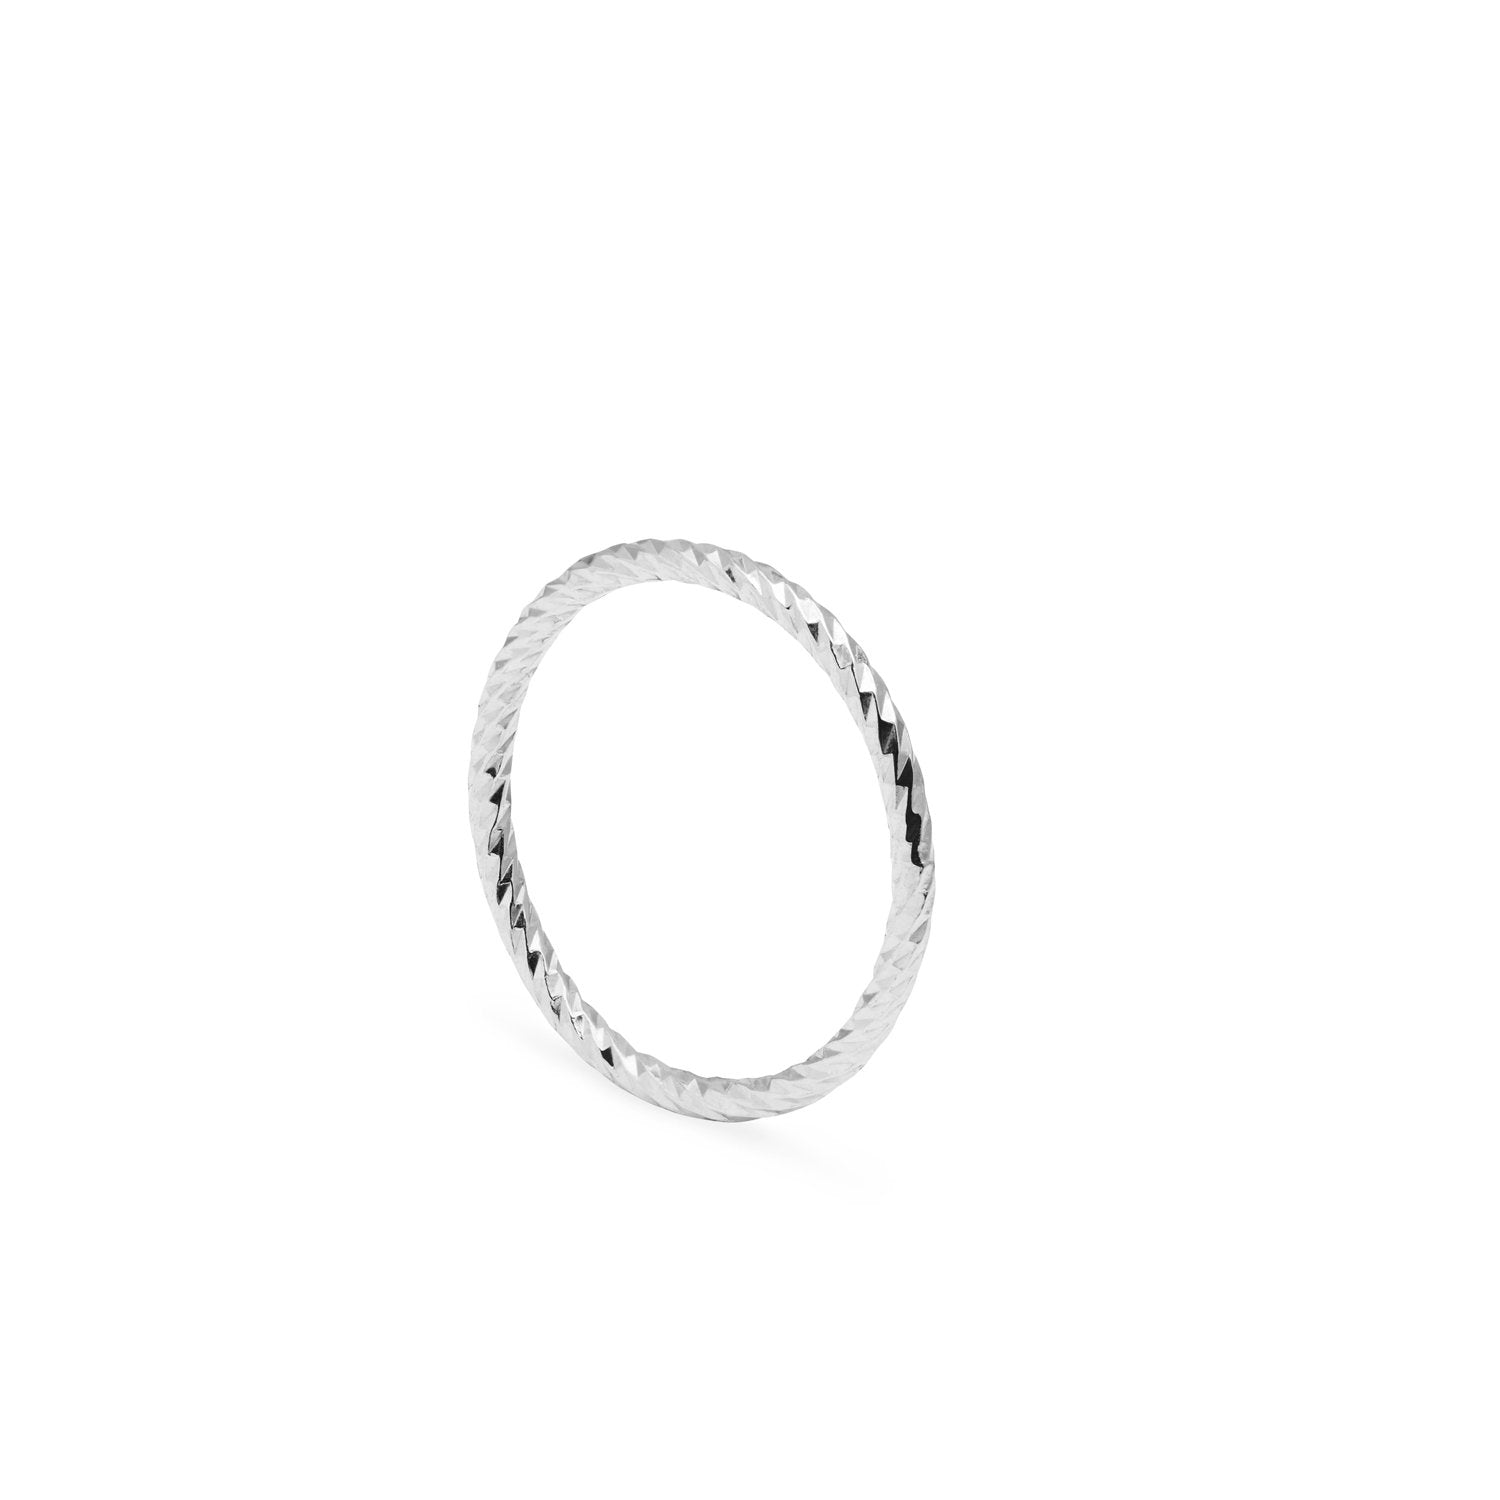 Faceted Diamond Ring - Silver - Myia Bonner Jewellery